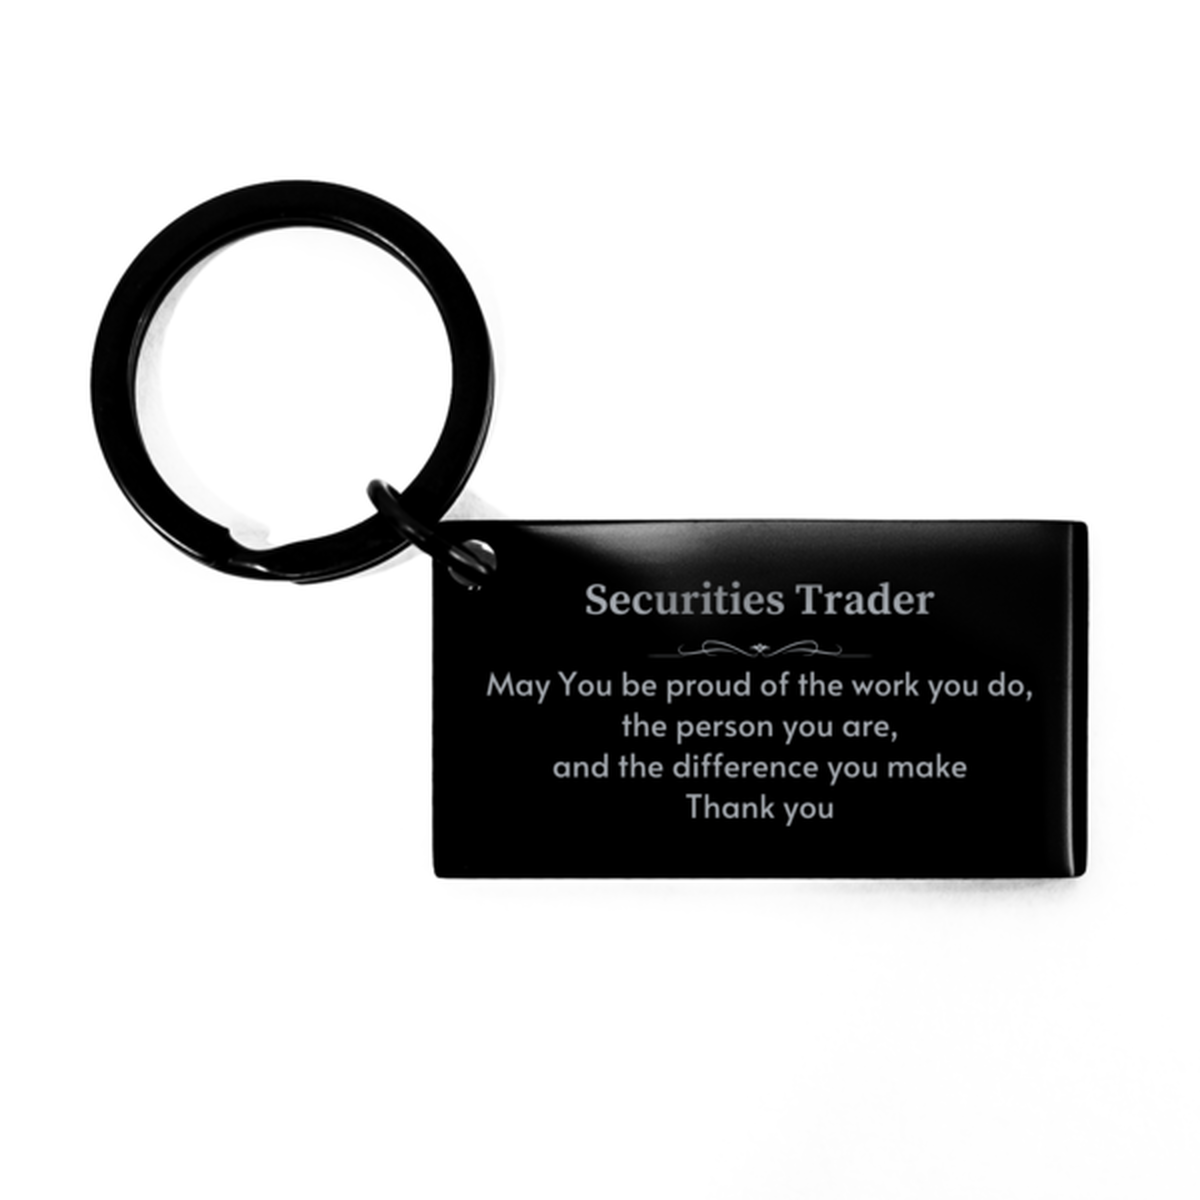 Heartwarming Keychain Retirement Coworkers Gifts for Securities Trader, Underwriter May You be proud of the work you do, the person you are Gifts for Boss Men Women Friends